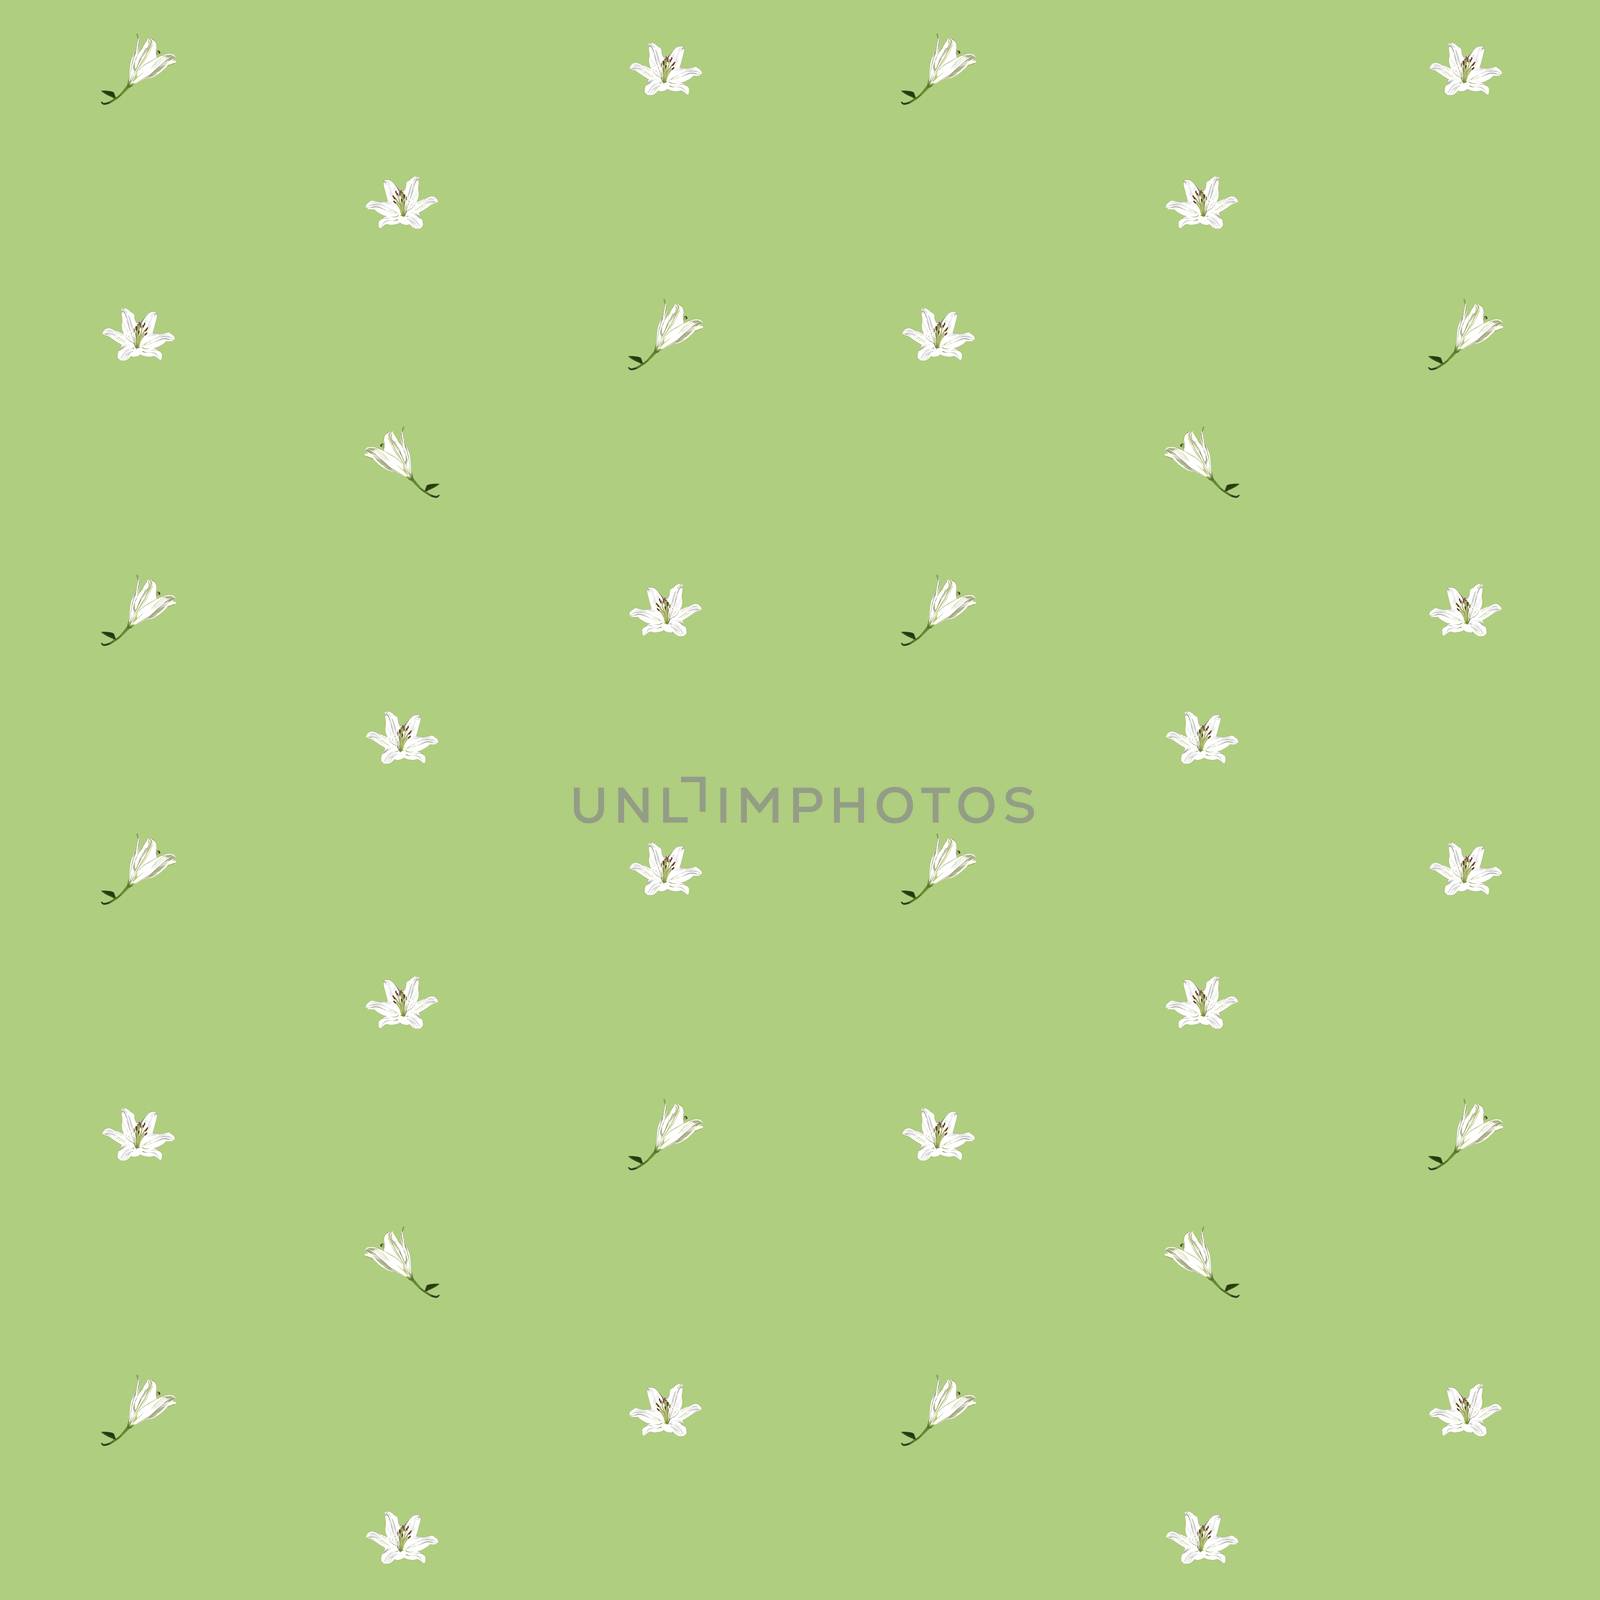 Lilies sparse pattern over light green